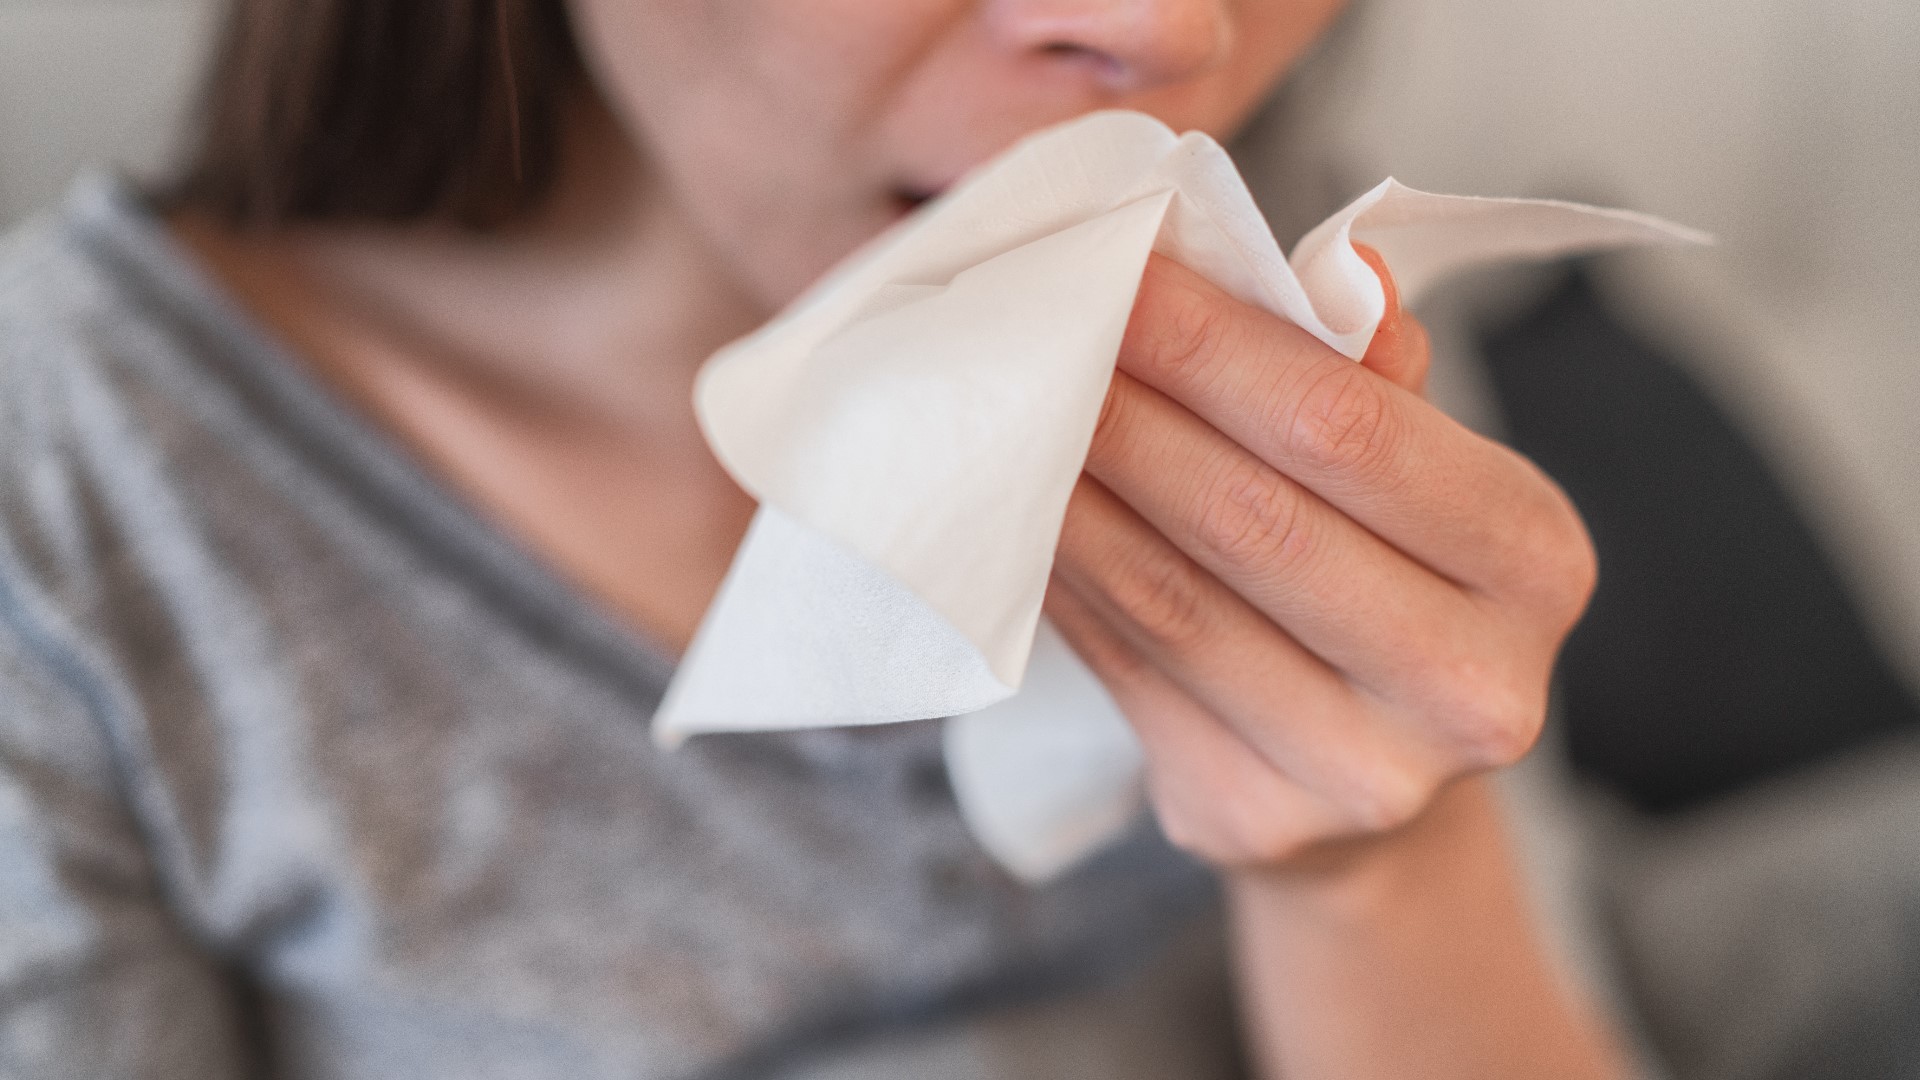 Have you had watery eyes and a runny nose lately? Spring means the return of pollen, and those annoying allergies. But are some times of day worse than others?